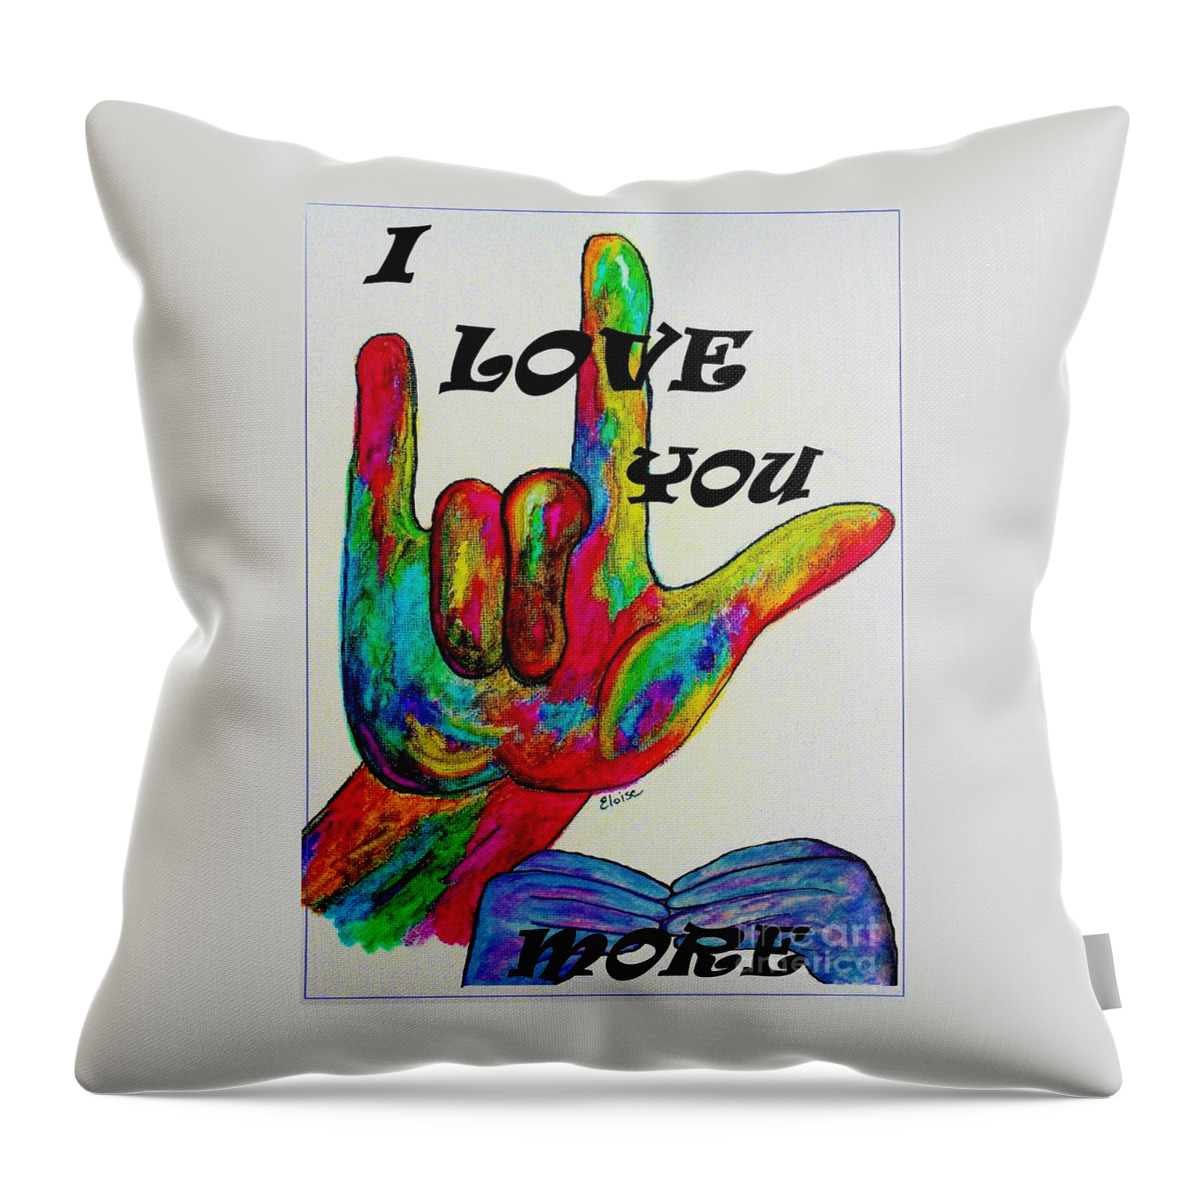 American Sign Language Throw Pillow featuring the painting American Sign Language I LOVE YOU MORE by Eloise Schneider Mote